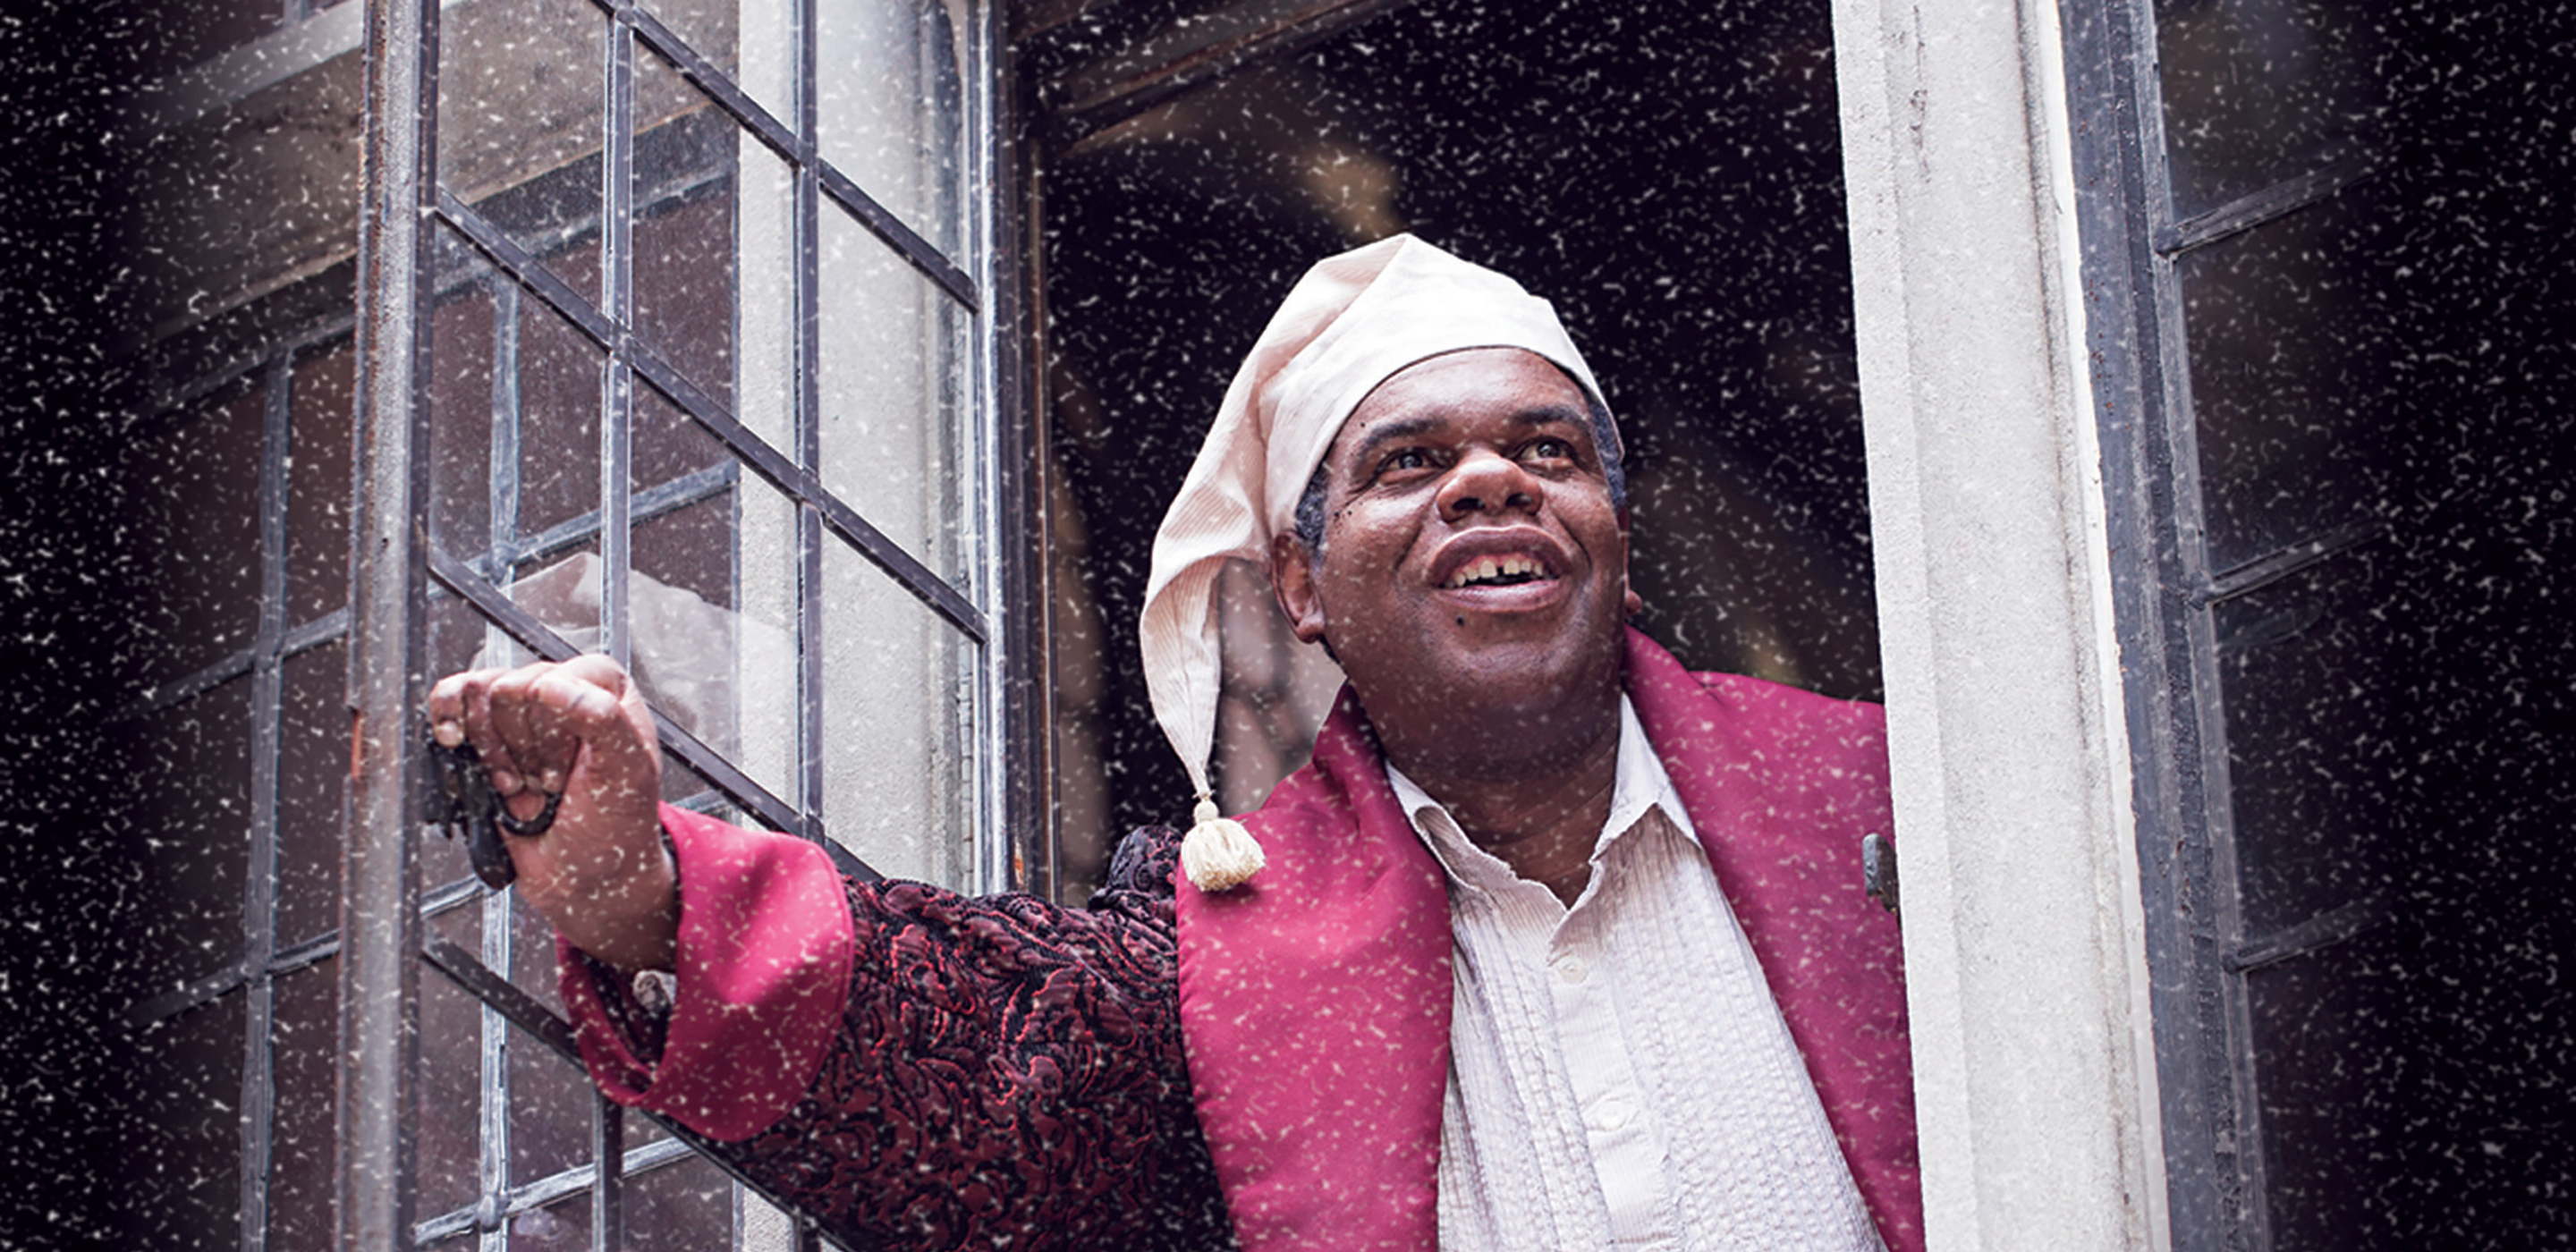 A smiling man dressed in Victorian era nightclothes opens a window to look out at the street. Snow is falling.